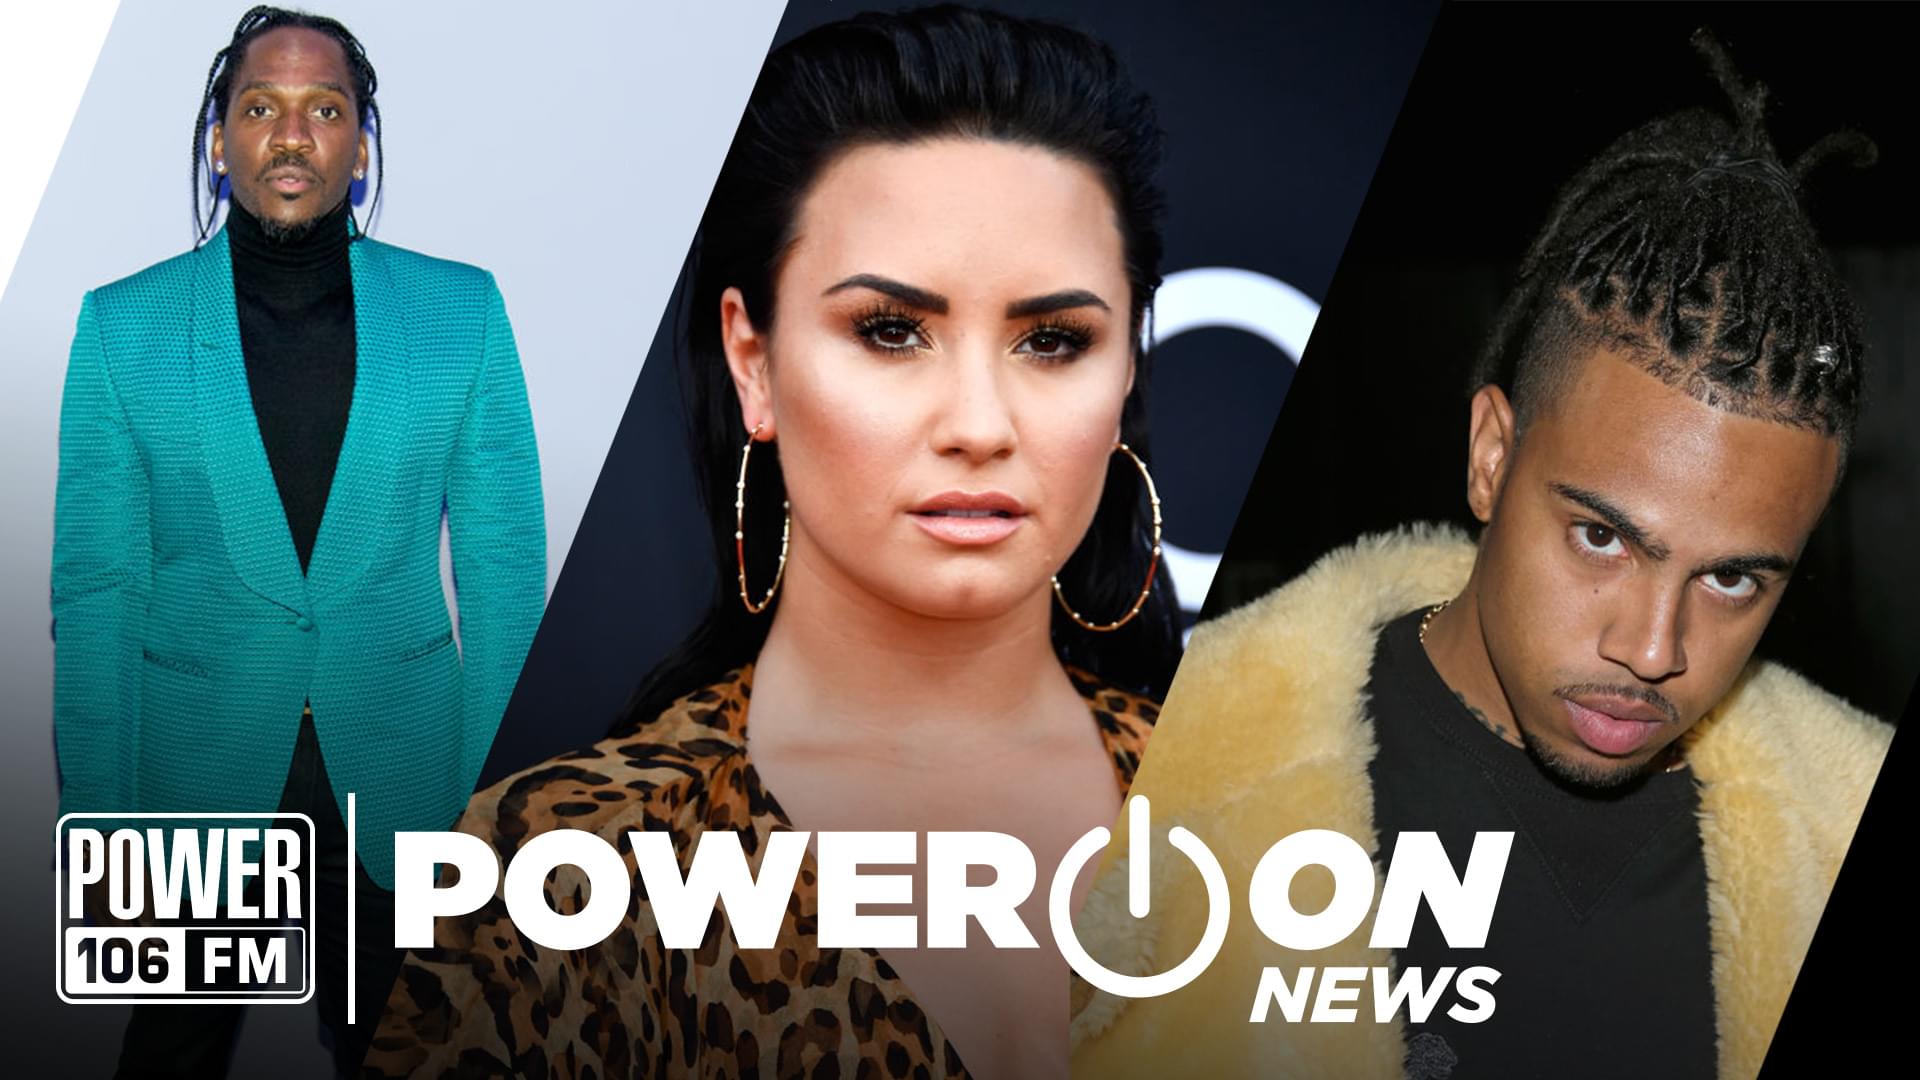 #PowerON: Vic Mensa’s Beef With 6ix9ine, Pusha T Gets Married, Offset Released Form Jail + MORE! [WATCH]